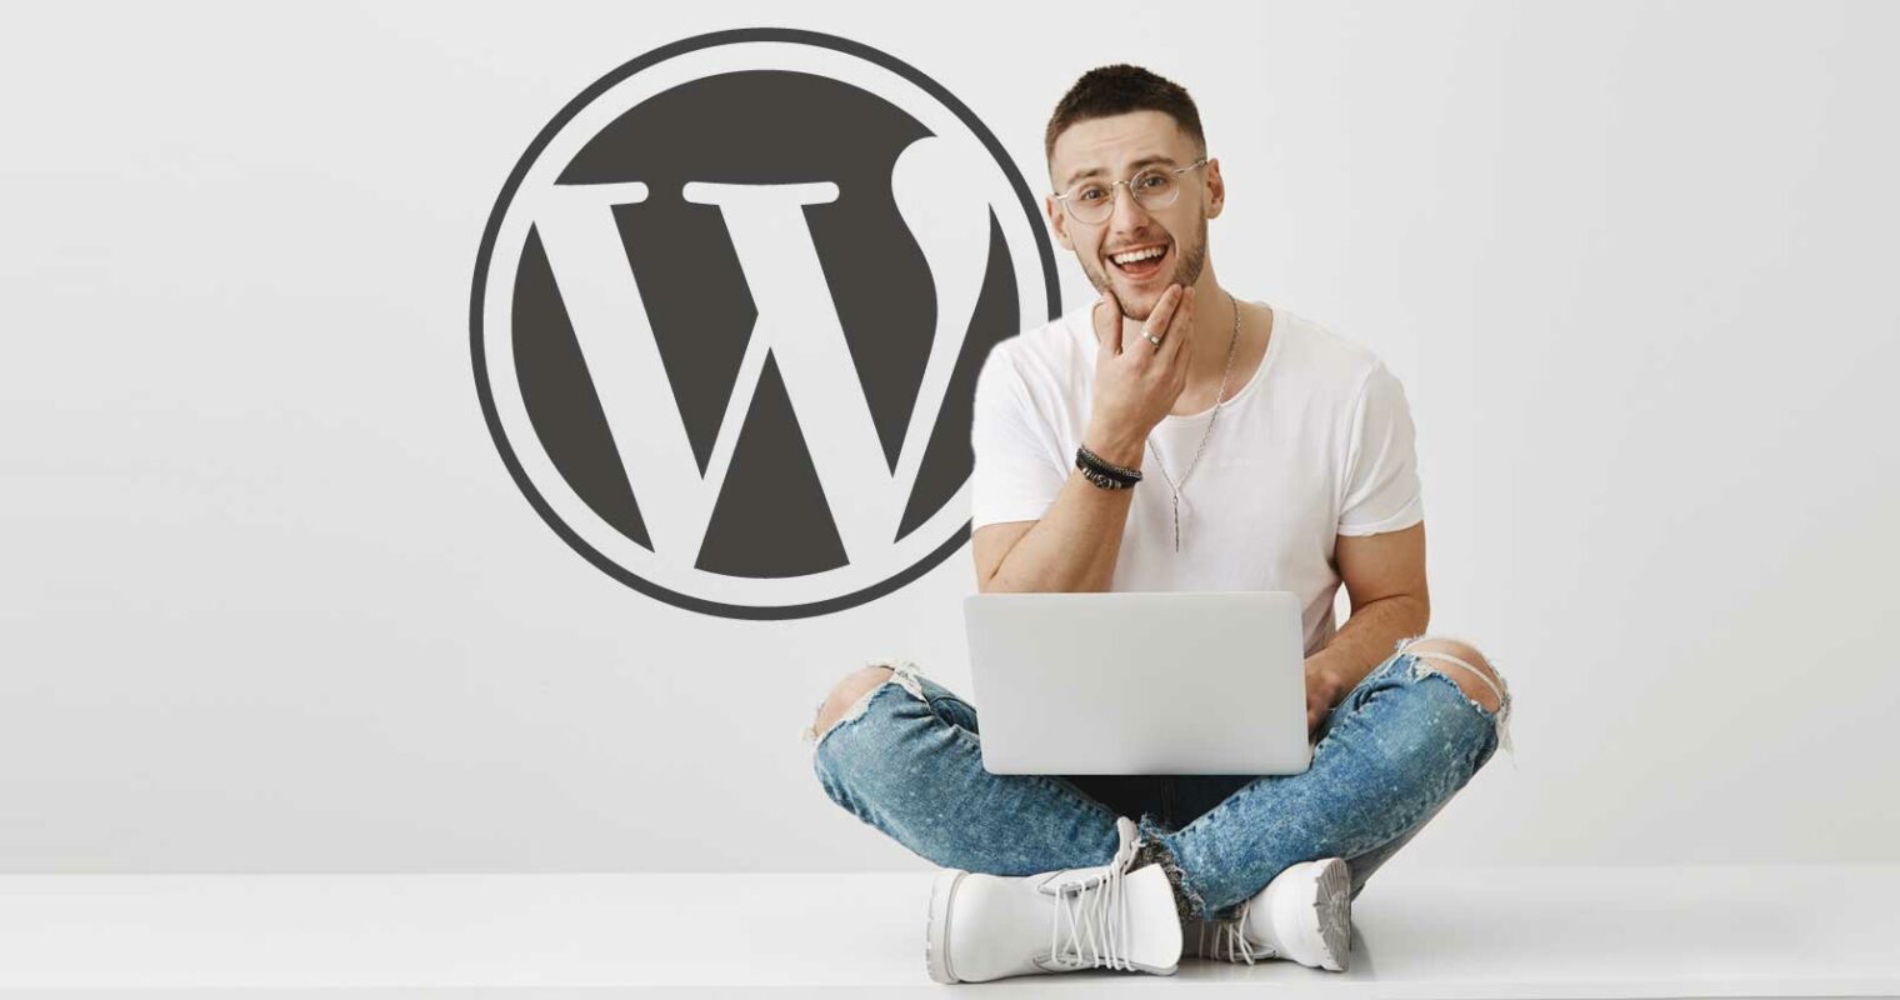 Cross Legged Man Sitting With Laptop In Front Of A White Wall Designing Custom Wordpress Website Design. On The Wall Is A Large Wordpress Logo.